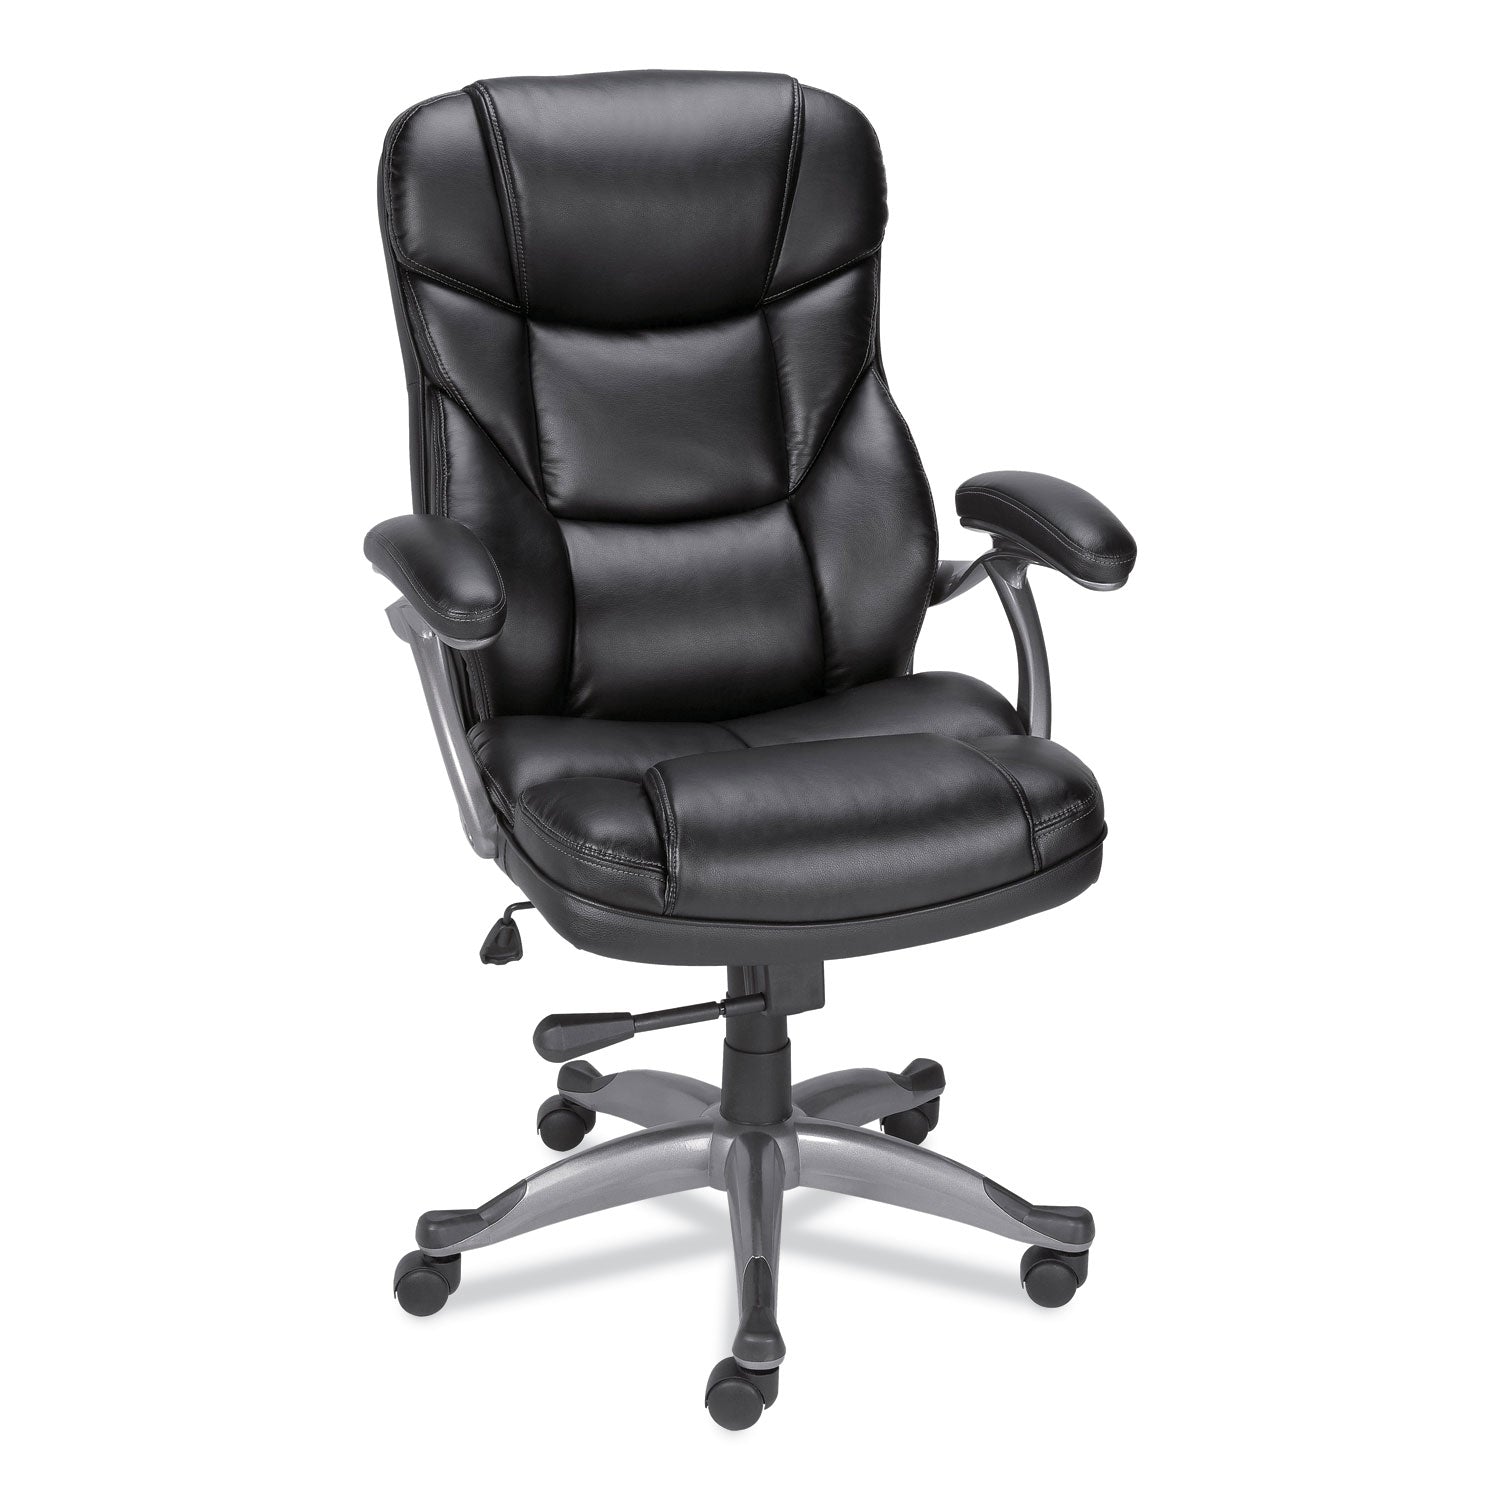 alera-birns-series-high-back-task-chair-supports-up-to-250-lb-1811-to-2205-seat-height-black-seat-back-chrome-base_alebn41b19 - 4